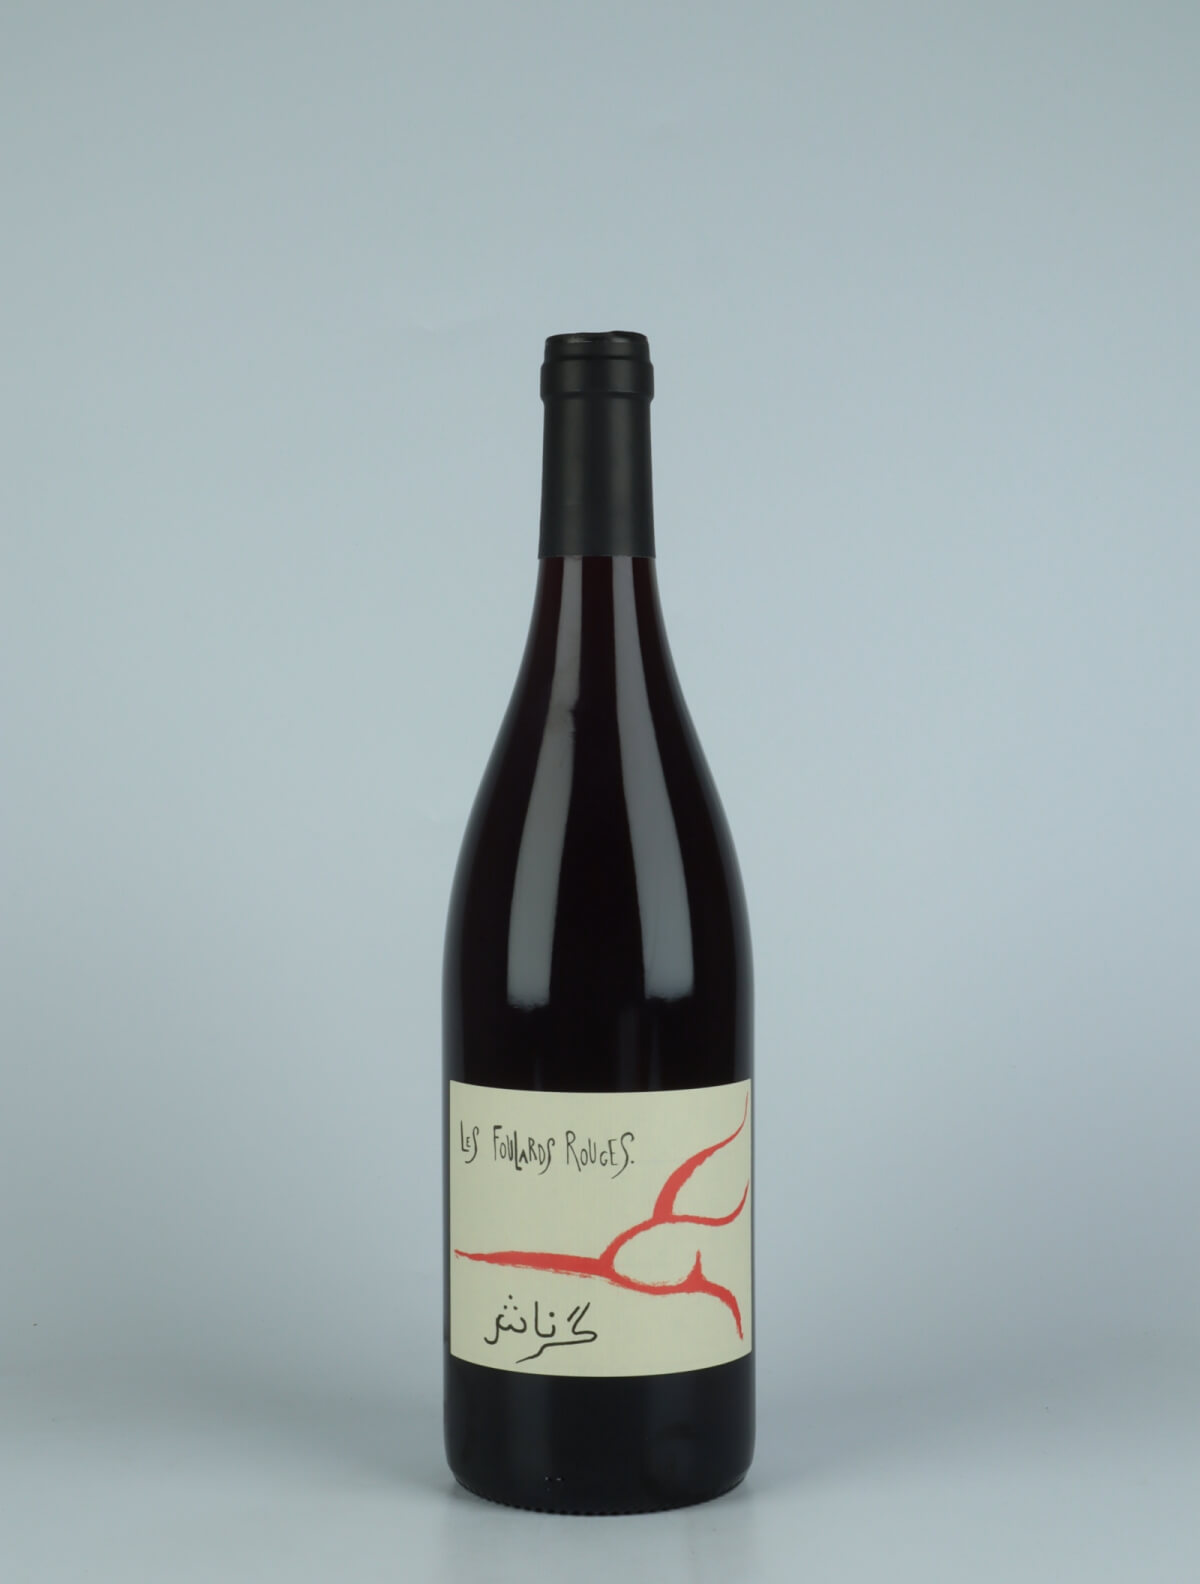 A bottle 2022 Grenache Red wine from Les Foulards Rouges, Languedoc in France